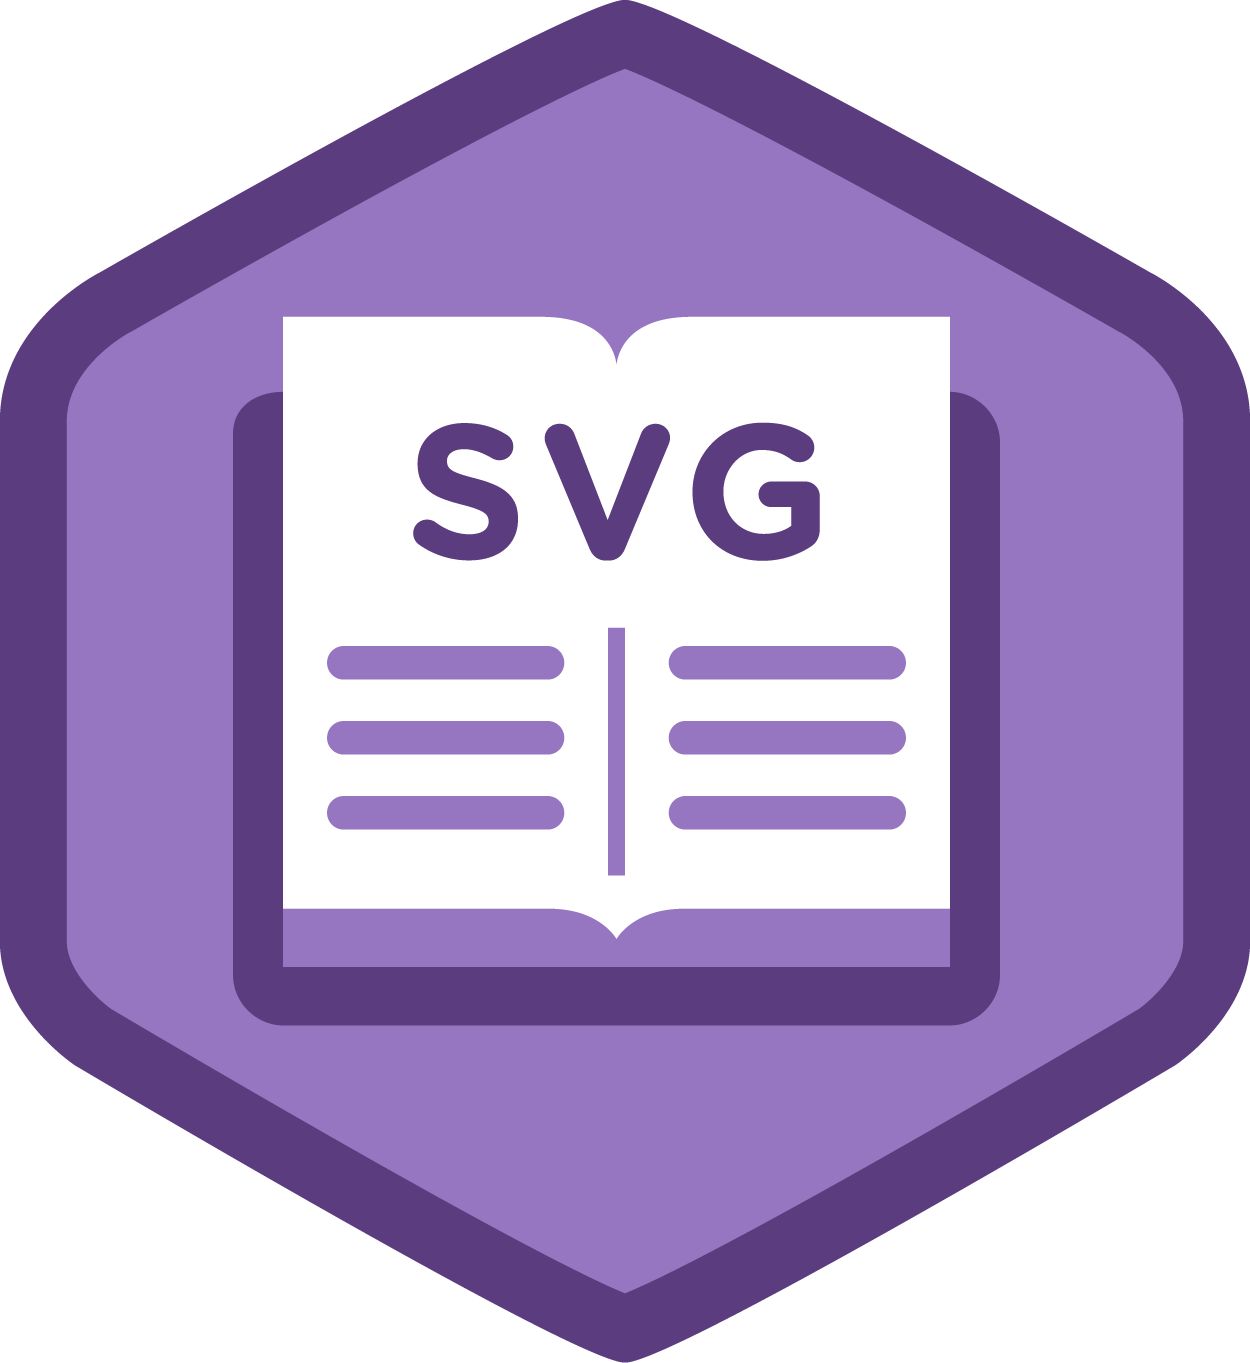 Treehouse svg #17, Download drawings